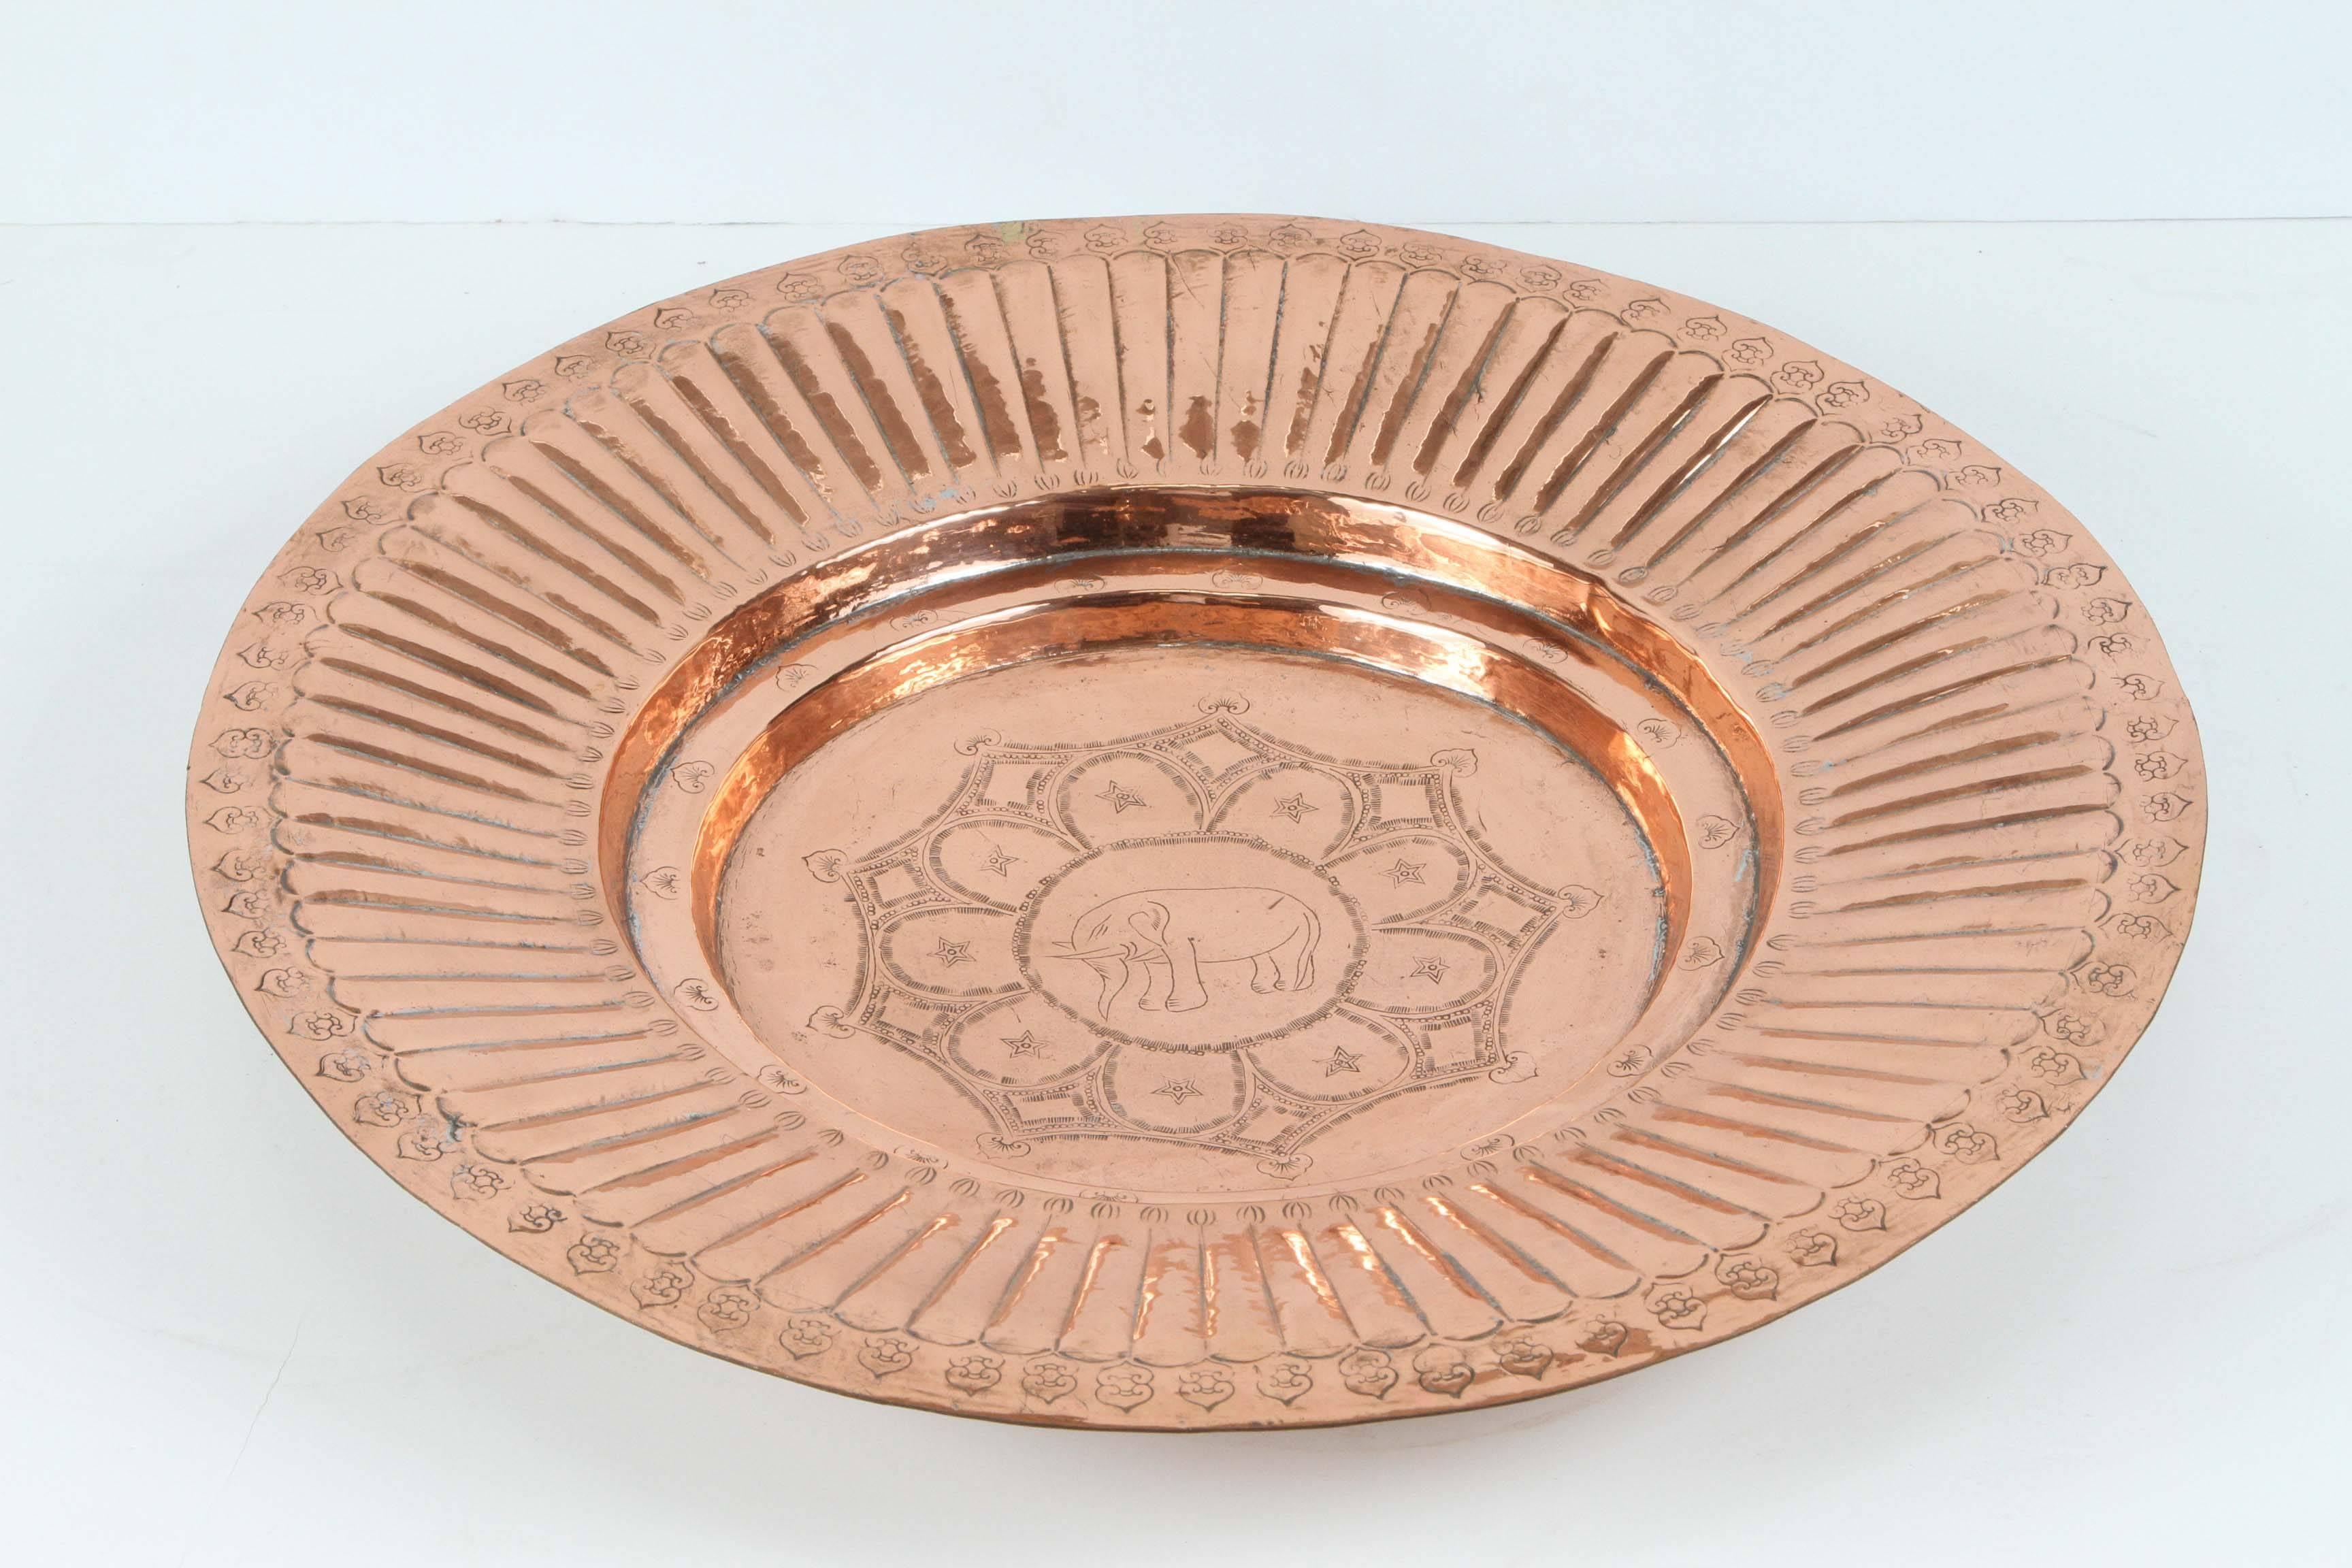 Polished round Asian Rajasthani metal copper tray, hand-hammered with geometric design in the middle, and an elephant in the center, the elephant in the Asian culture means protection and long life.
Handcrafted in India, Rajasthan.
Great to use as a